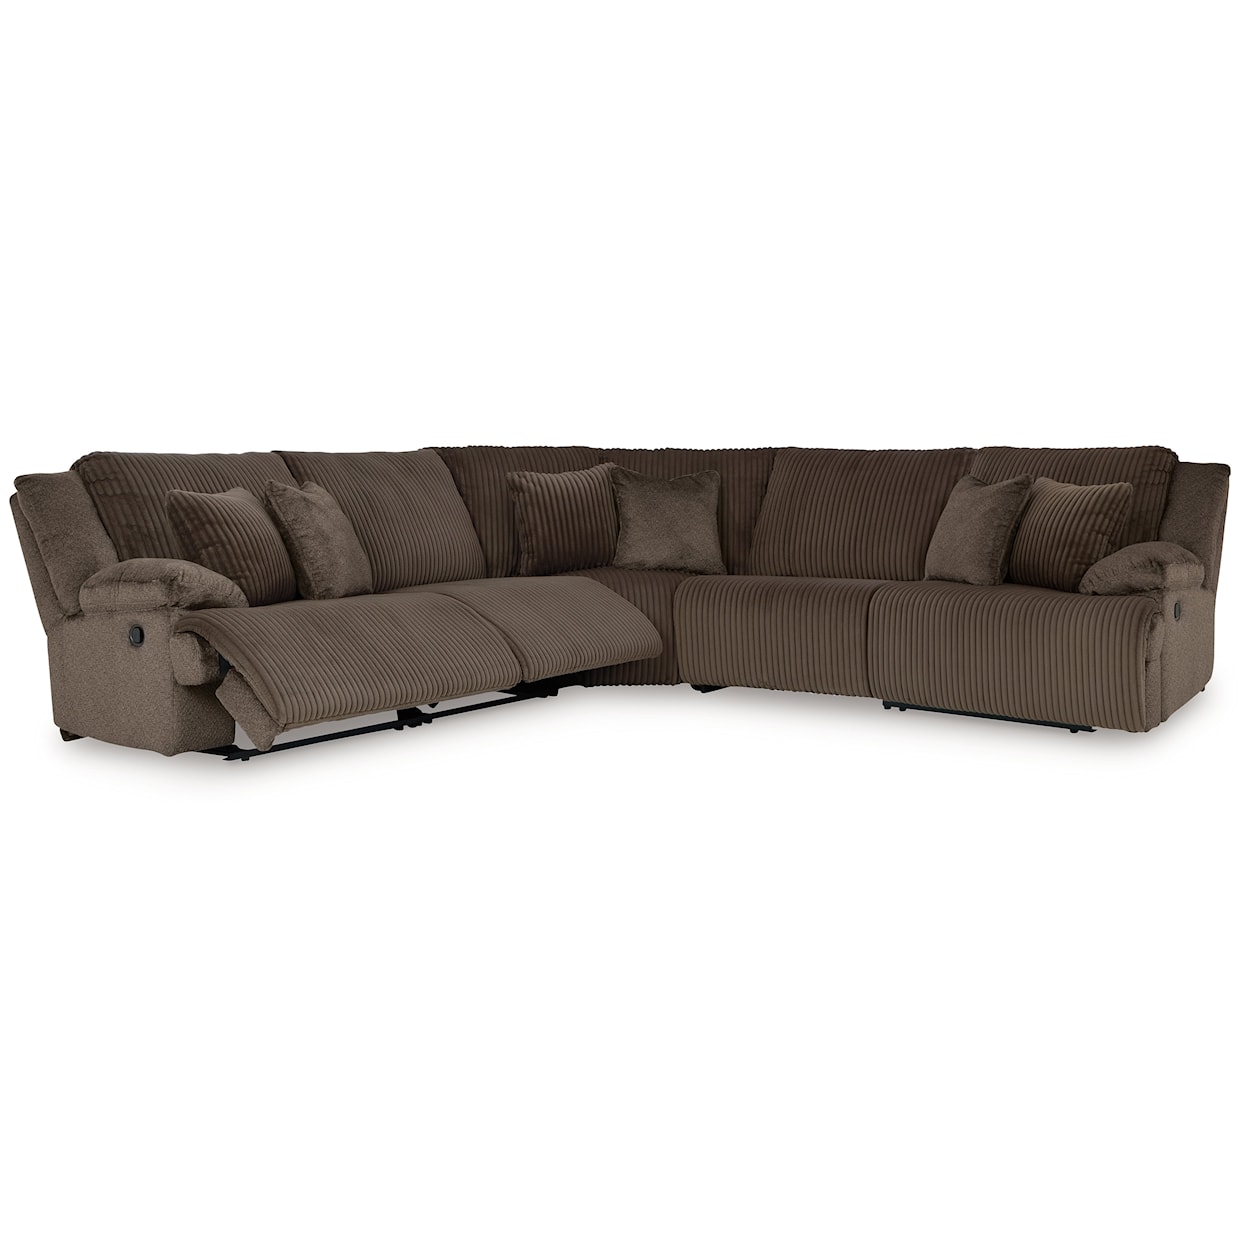 Signature Design by Ashley Top Tier 5-Piece Reclining Sectional